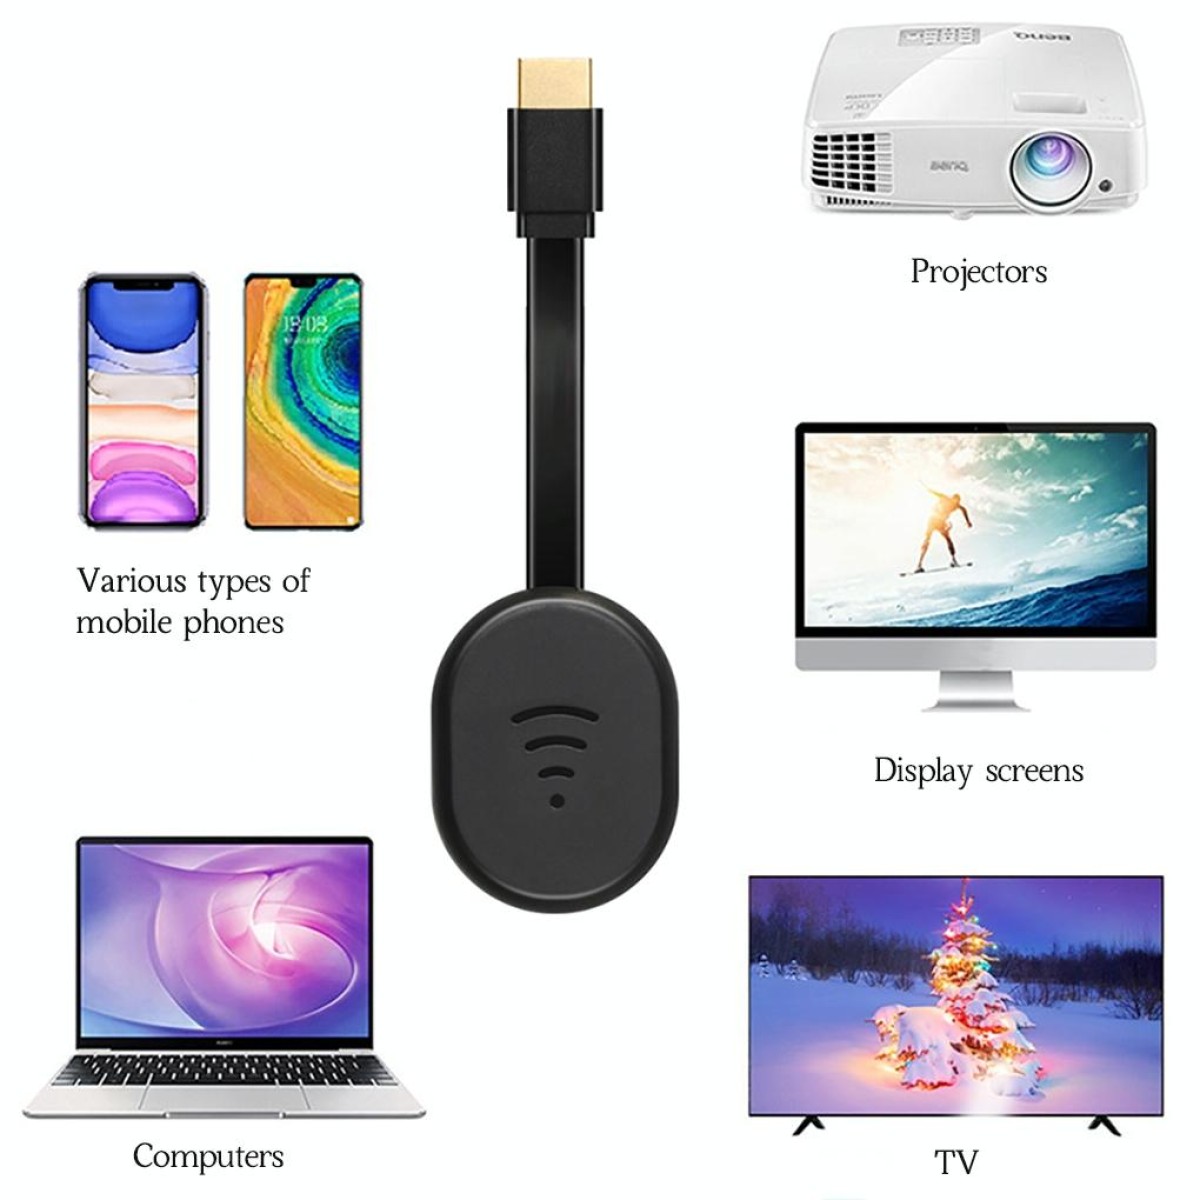 E38 White Wireless WiFi Display Dongle Receiver Airplay Miracast DLNA TV Stick for iPhone, Samsung, and other Smartphones